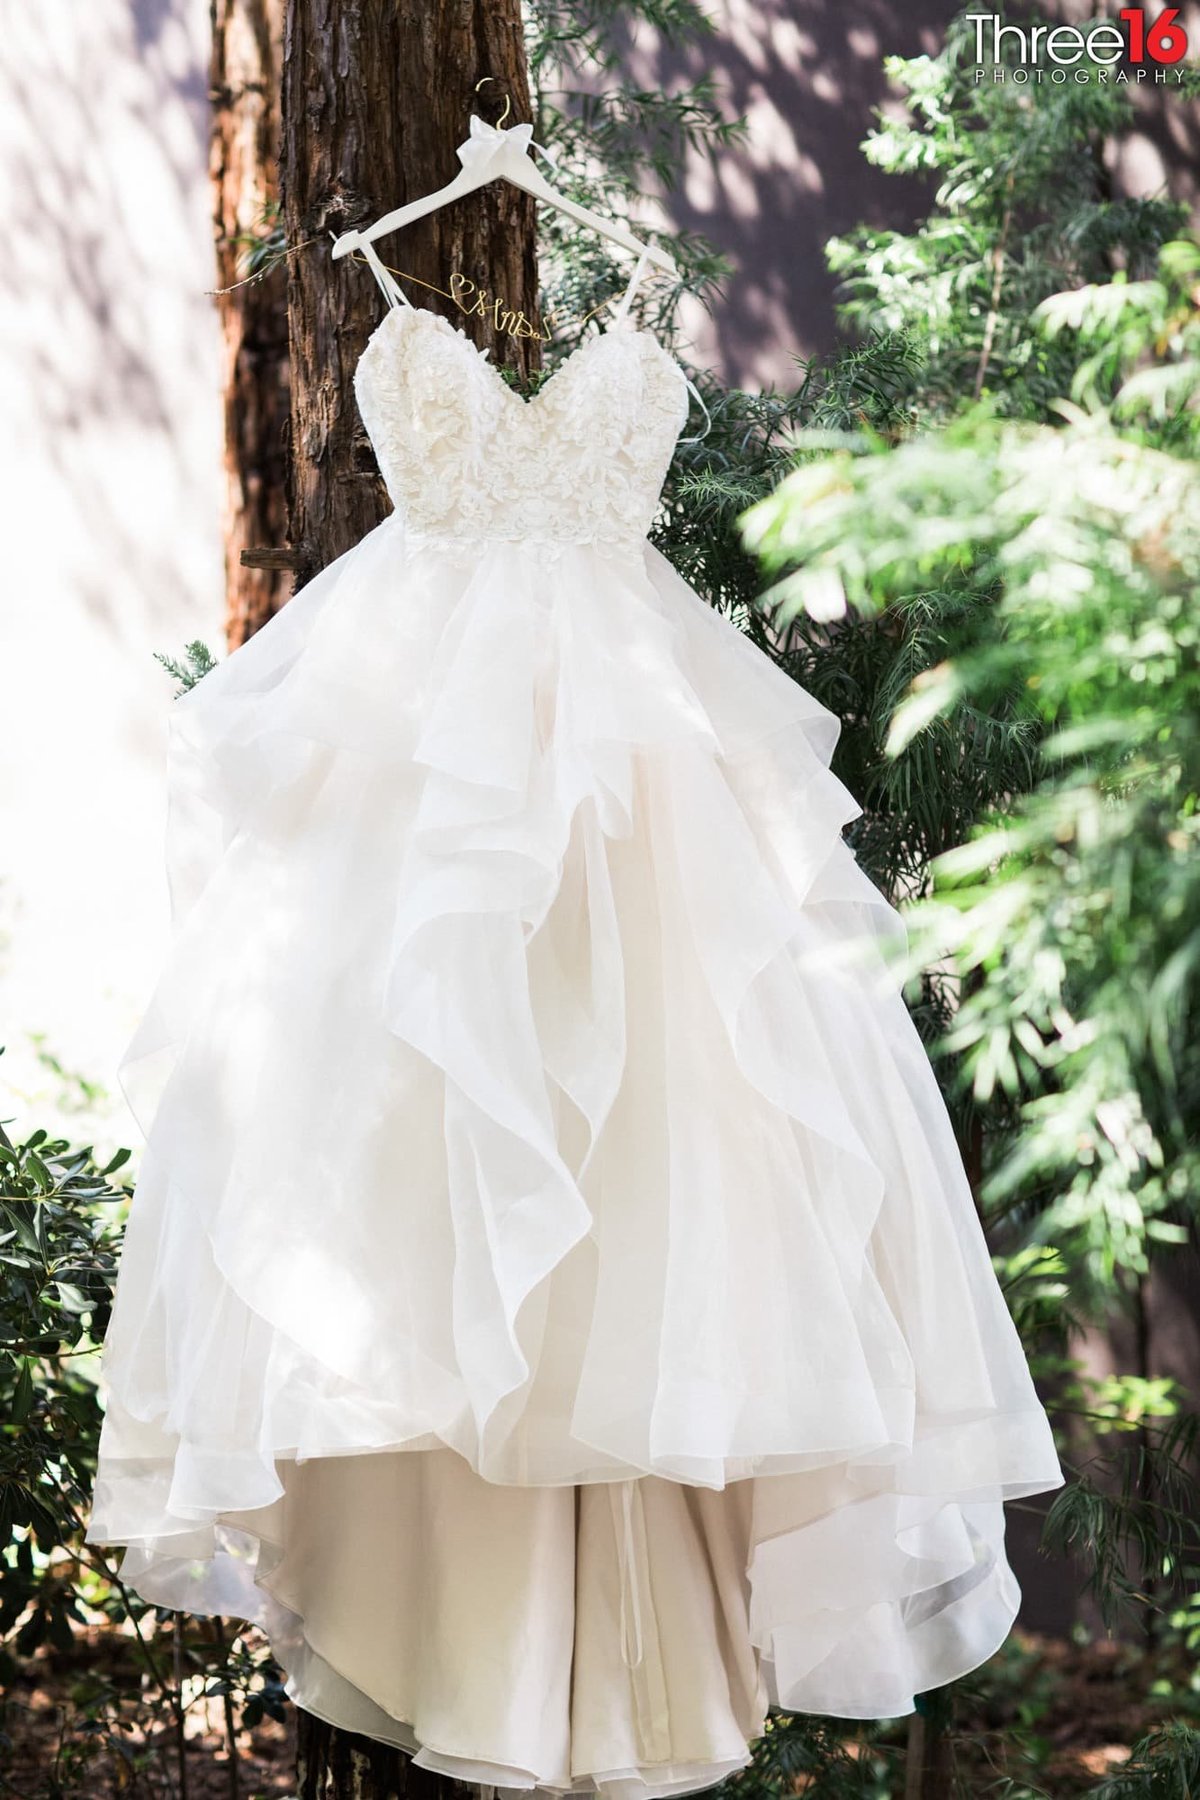 Beautiful white gown hangs from tree prior to the wedding